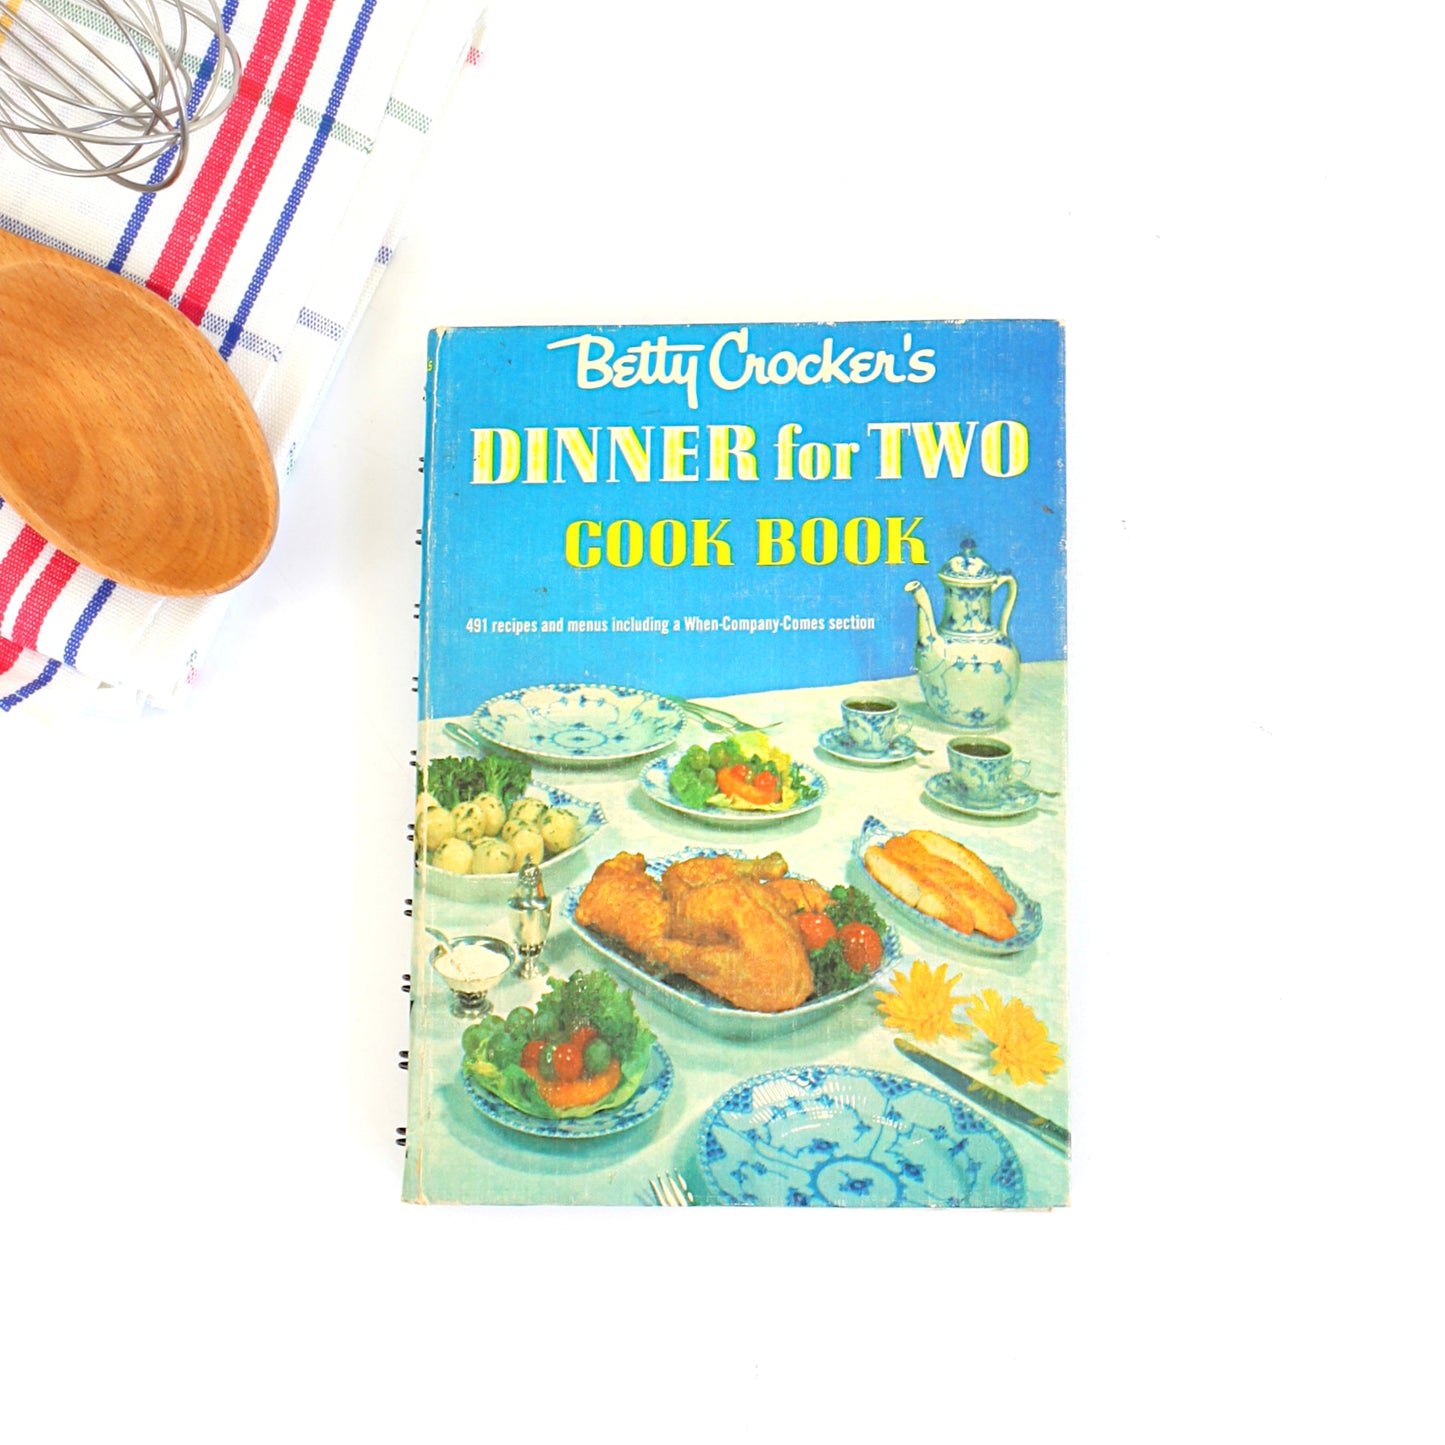 SOLD - Betty Crocker's Dinner for Two Cook Book / Vintage 1958 Spiral Bound Cookbook *Free US Shipping*